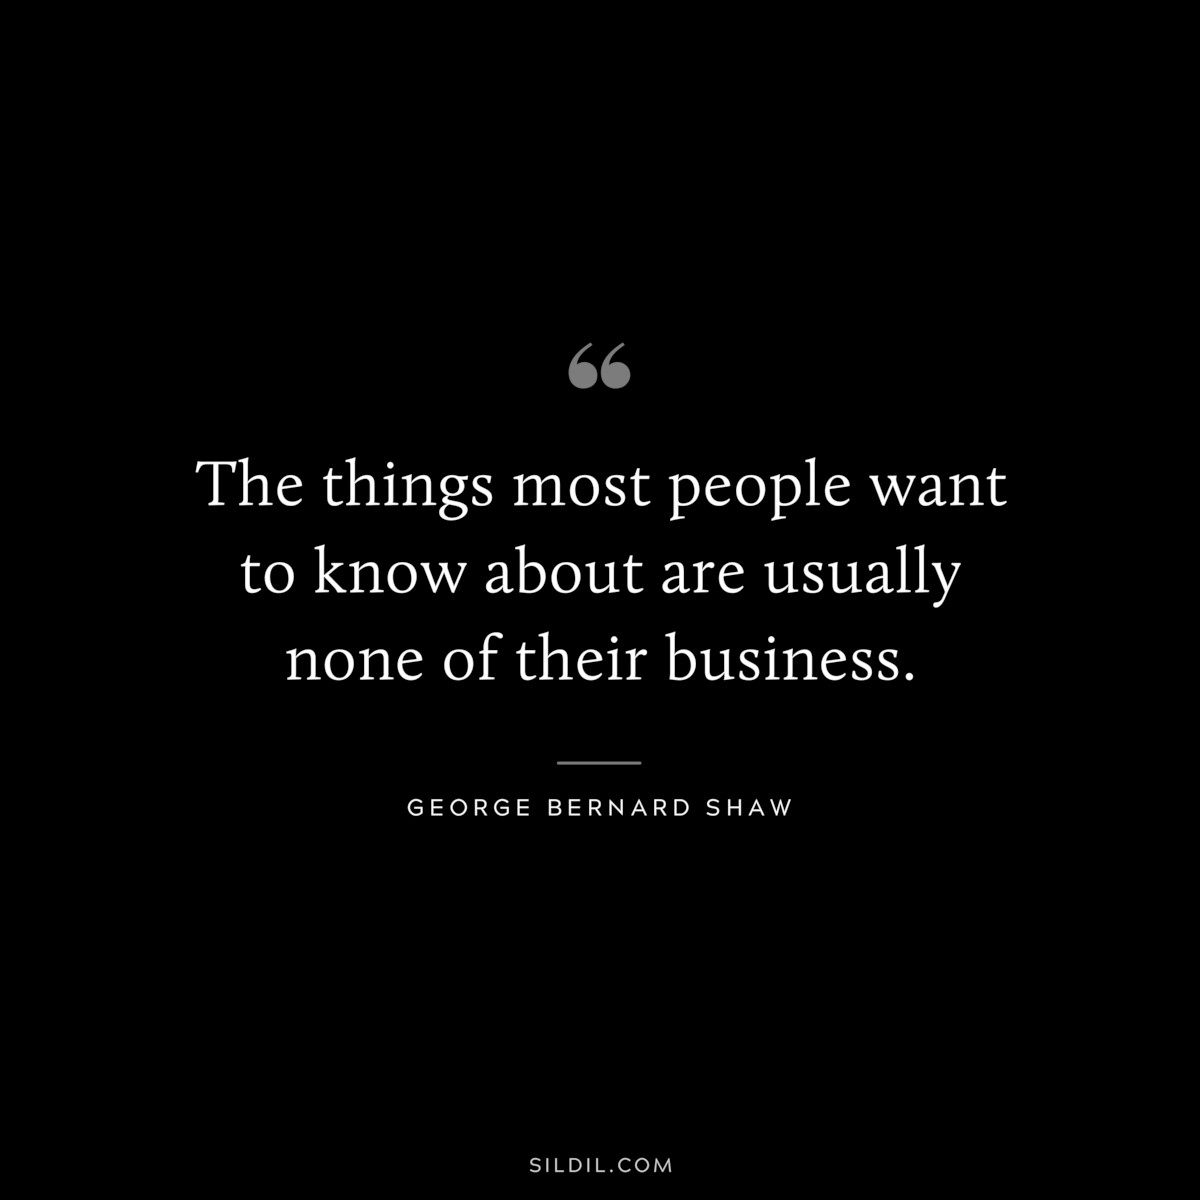 The things most people want to know about are usually none of their business. ― George Bernard Shaw